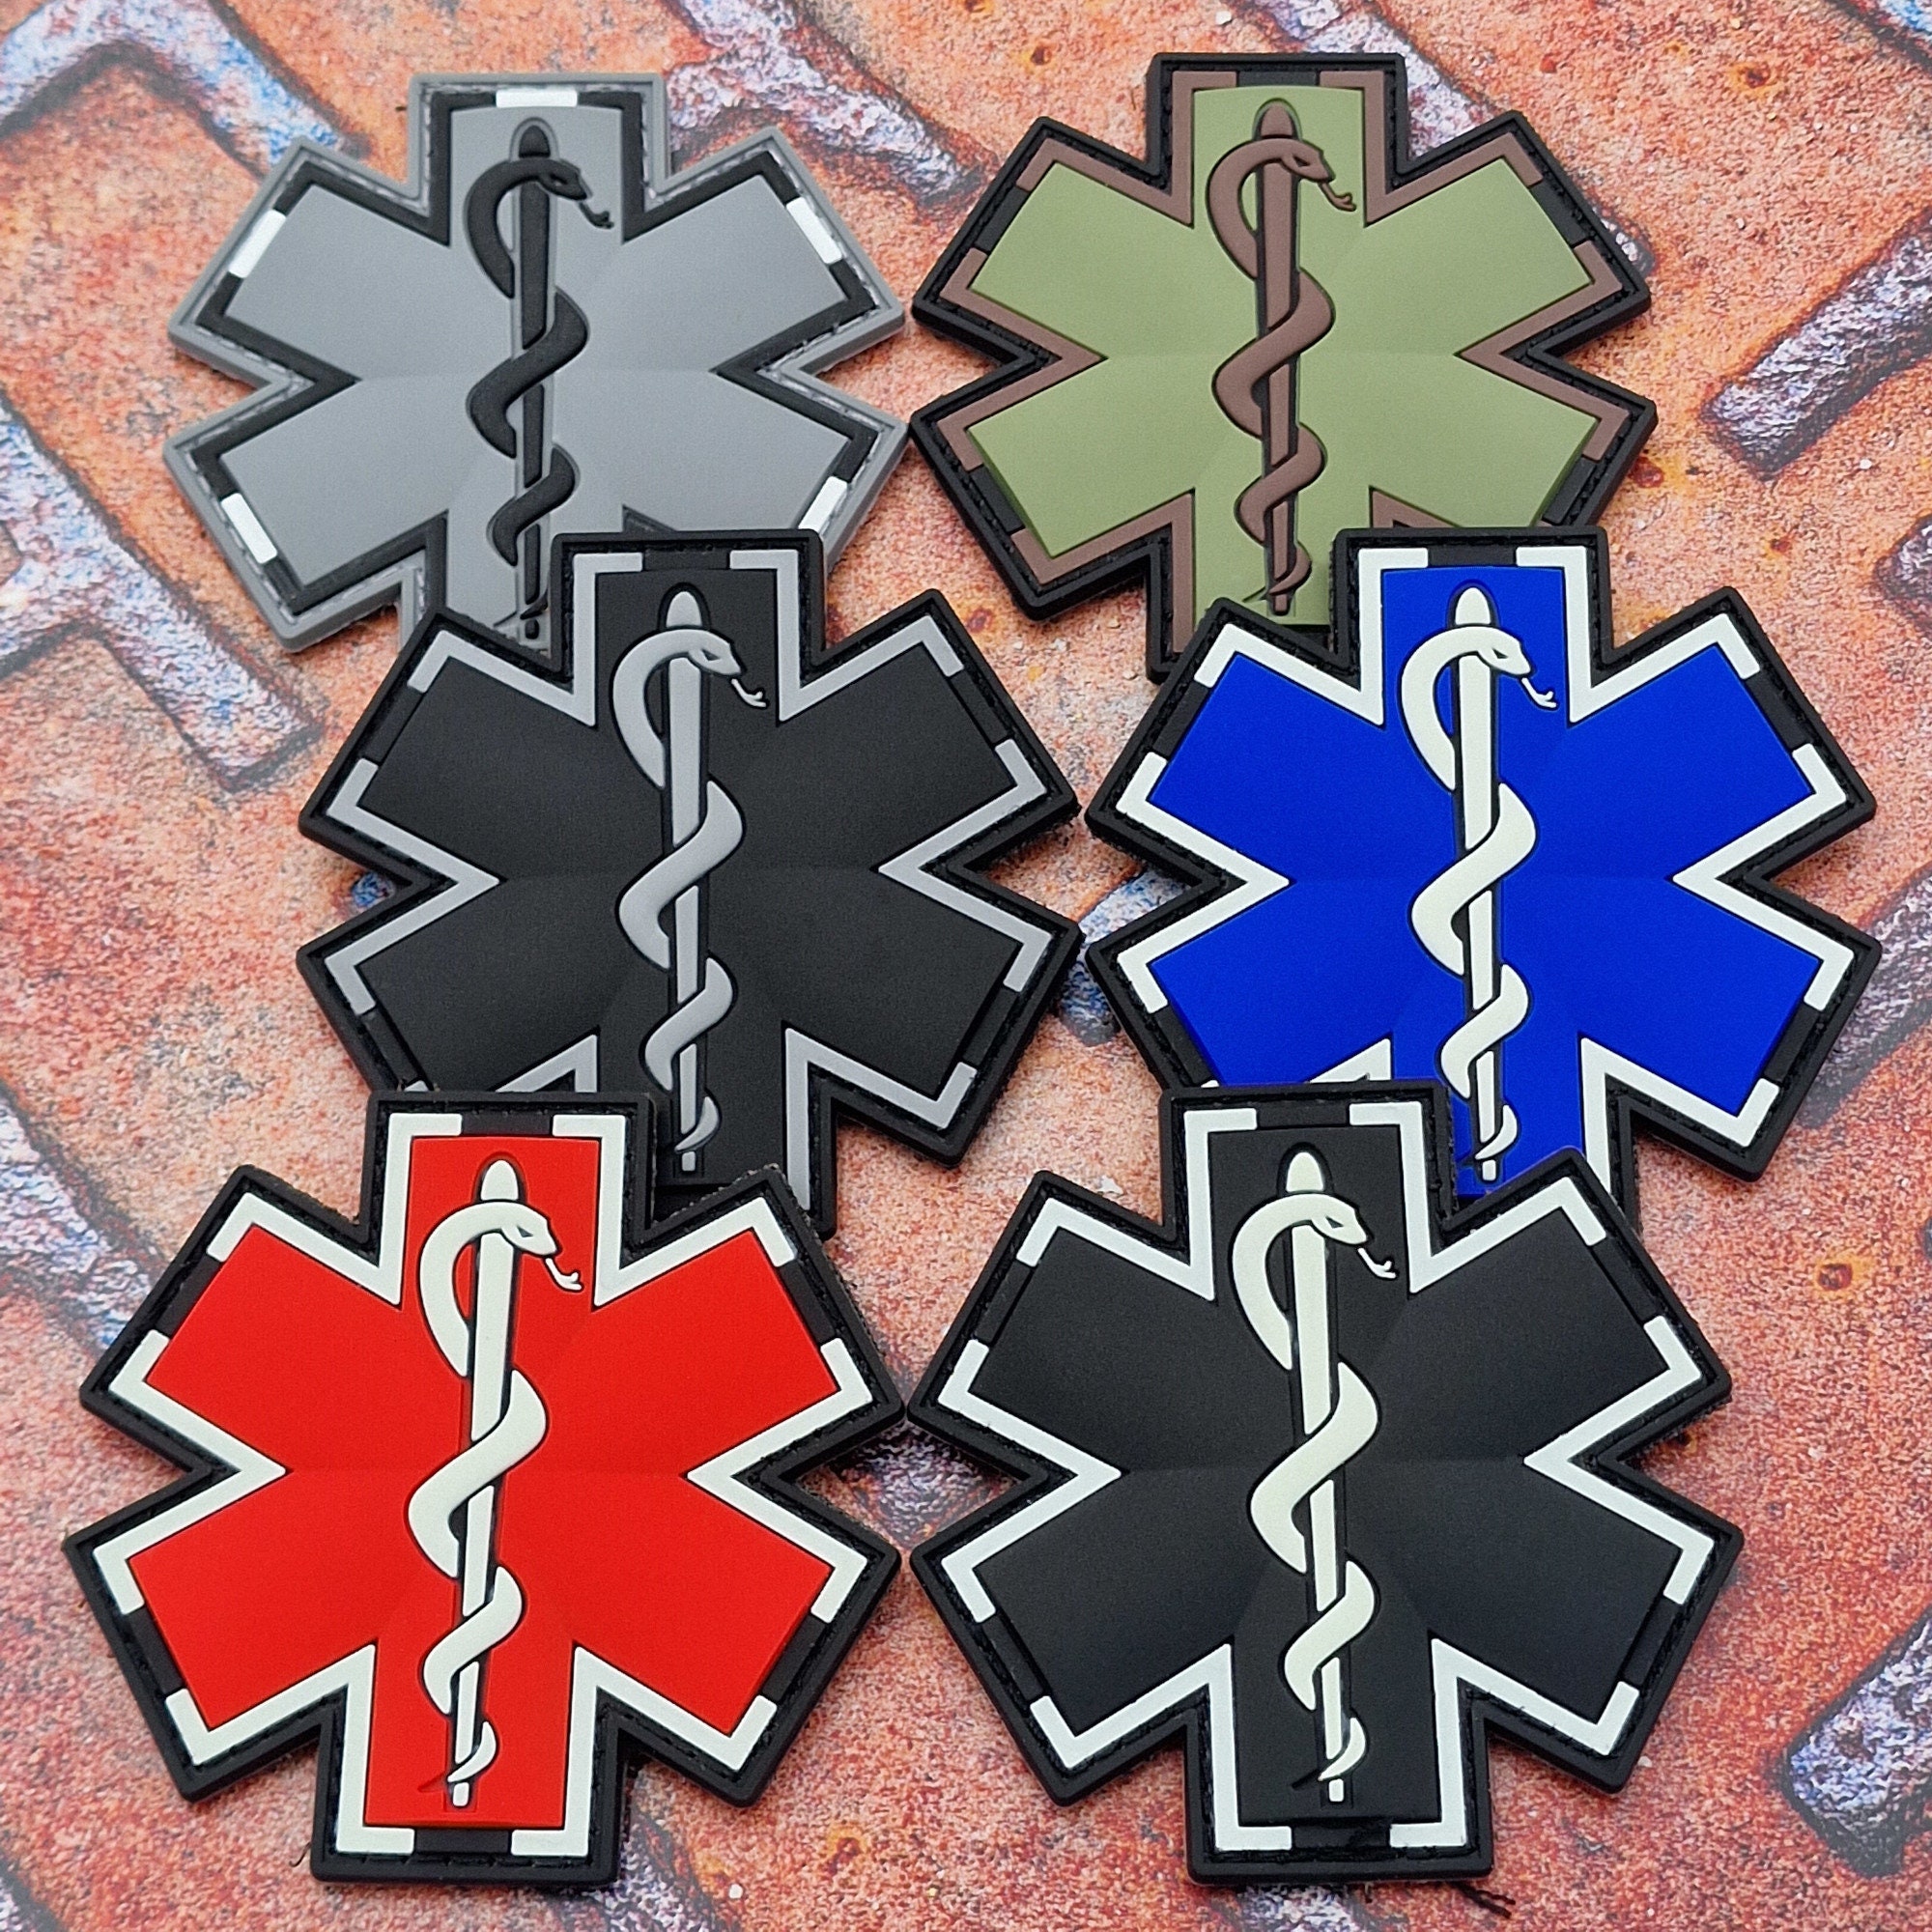 Medic Patch 3D PVC Rubber Paramedic Medical PATCH EMS EMT MED First Aid  Tactical Skull Military